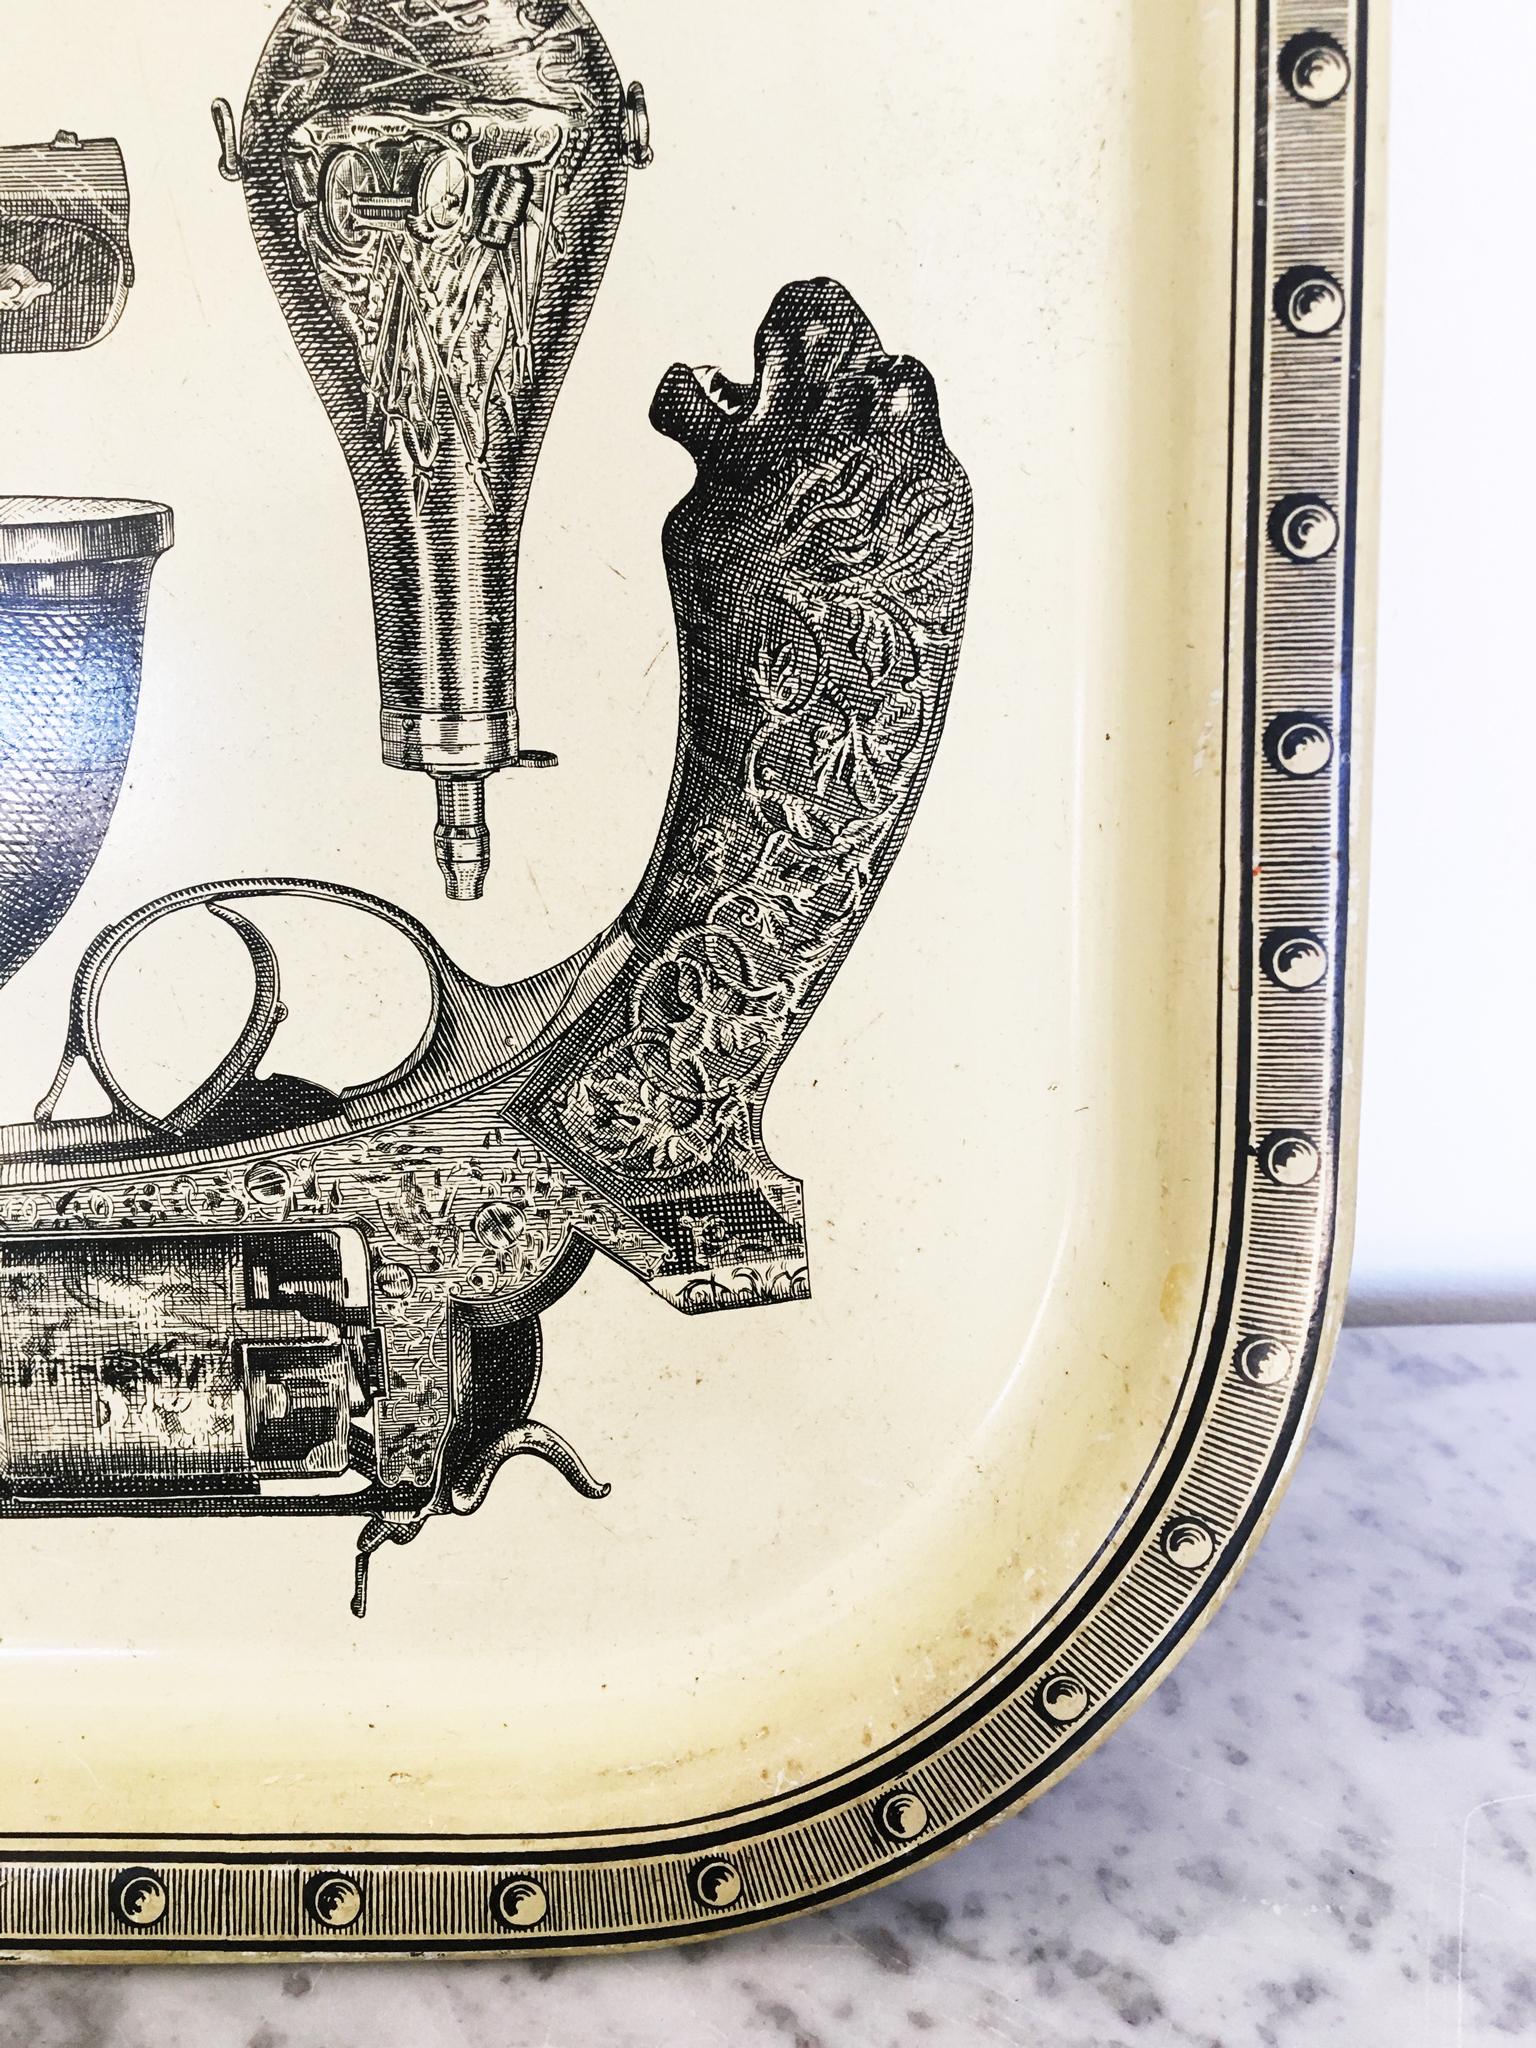 Maison Fornasetti 'Pistole' enamelled steel serving trays featuring a cool and quirky print of antique pistols and guns. The underside is a printed wood effect. Some user marks.
Two trays available.
Italian, circa 1960.

Size 33 x 33 cms

The